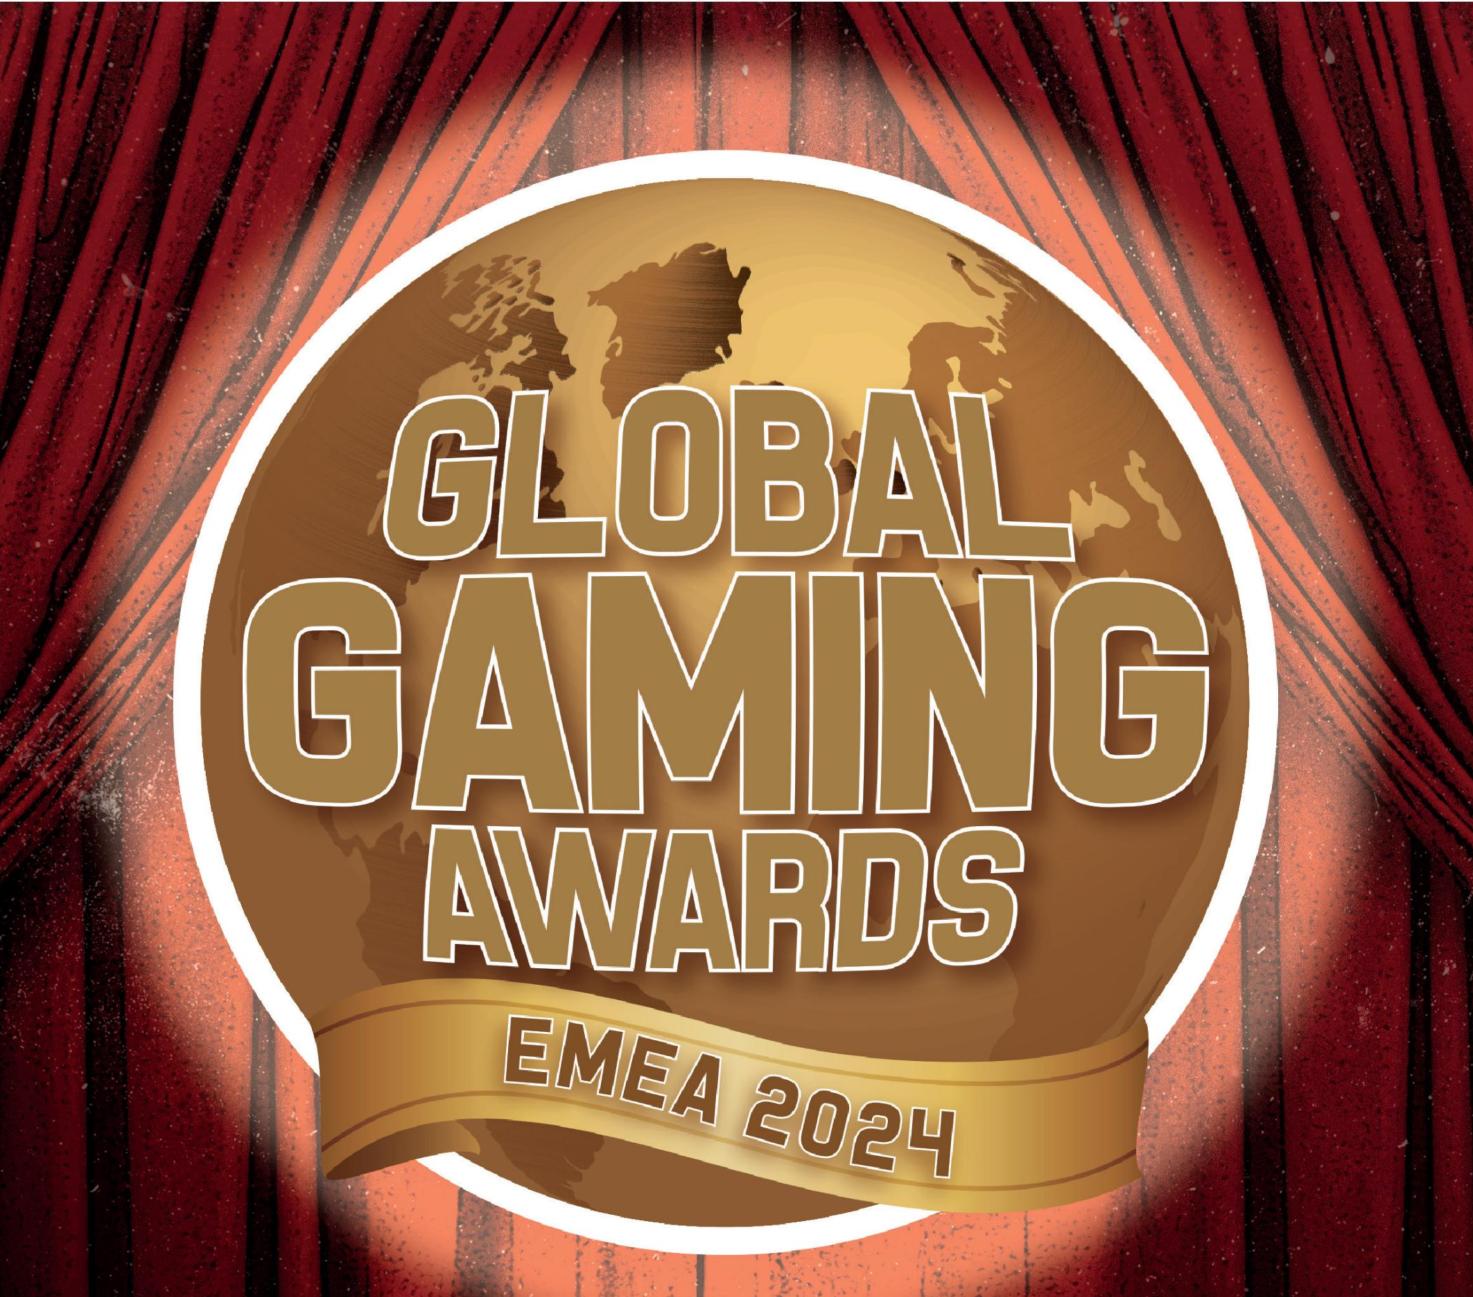 LUCKY NUMBER 7 AT THE GLOBAL GAMING AWARDS